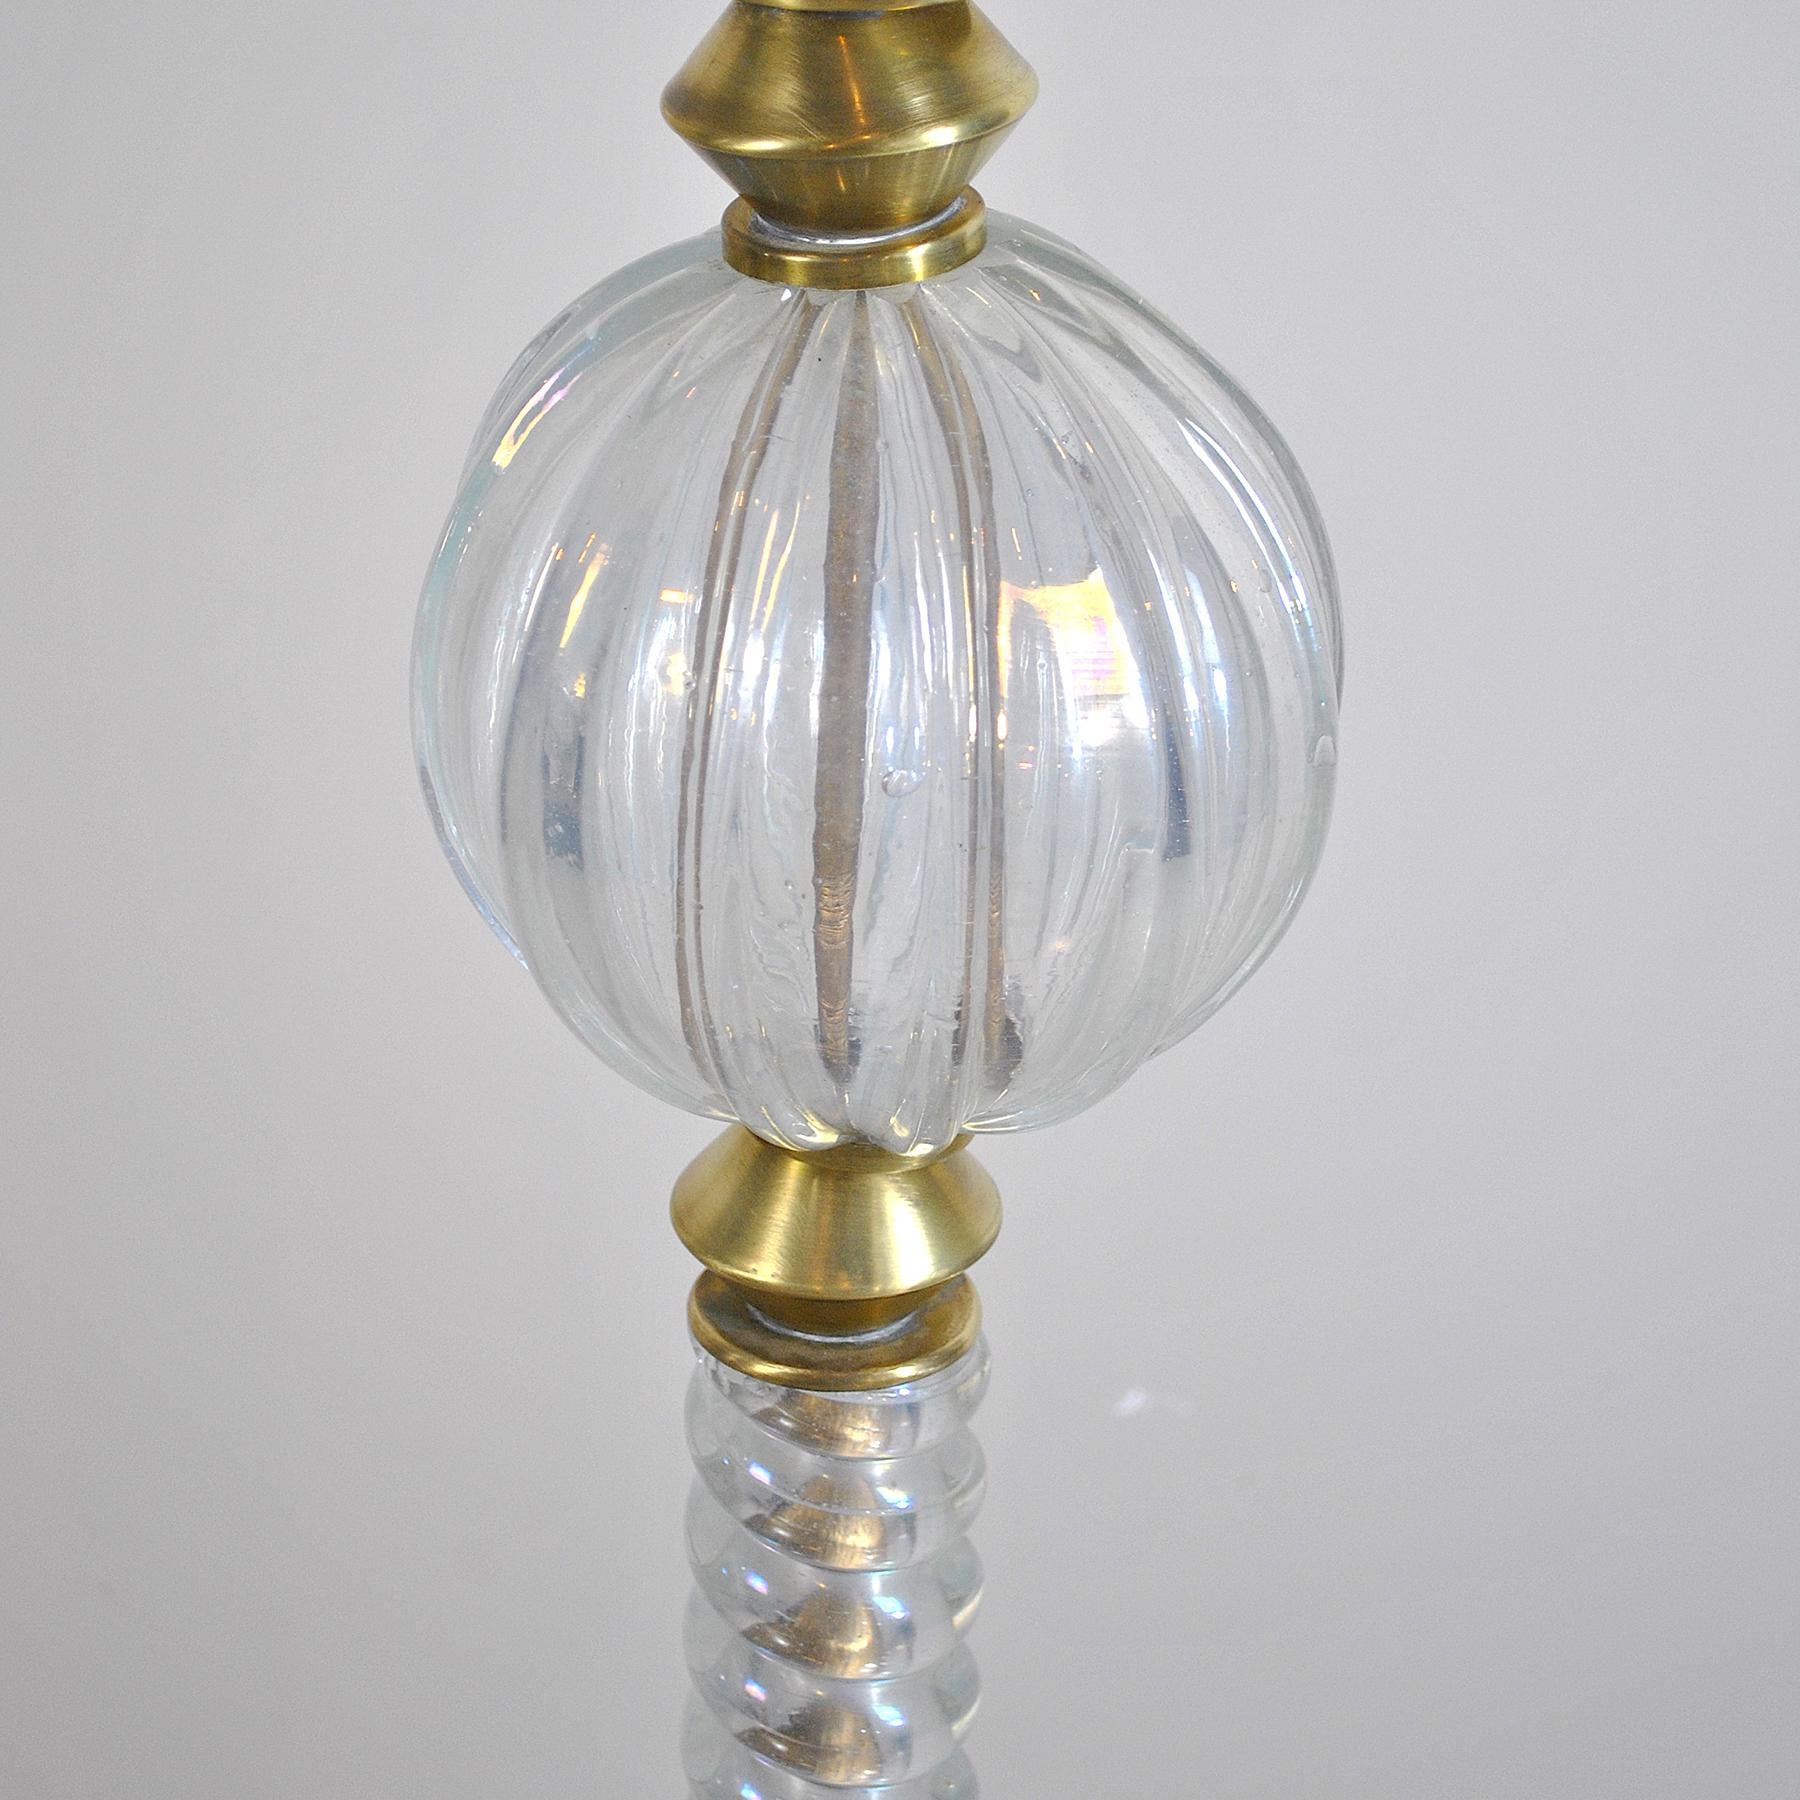 Brass Italian Midcentury Floor Lamp by Barovier & Toso For Sale